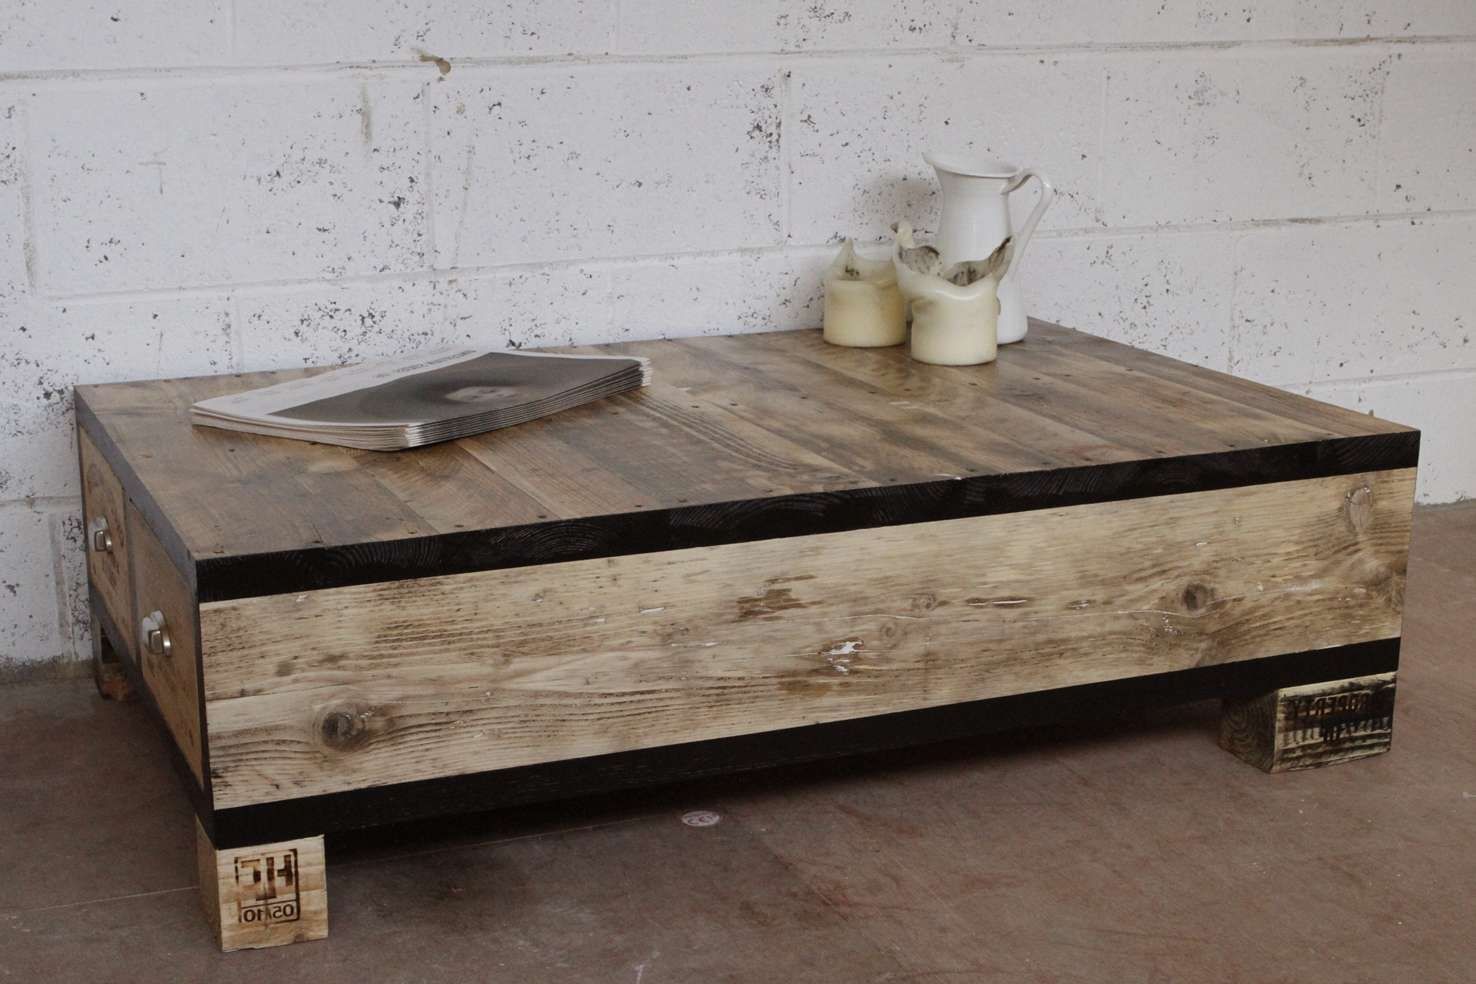 Old And Vintage Diy Square Low Wood Coffe Table With Drawers Using Inside Widely Used Low Coffee Tables With Drawers (View 1 of 20)